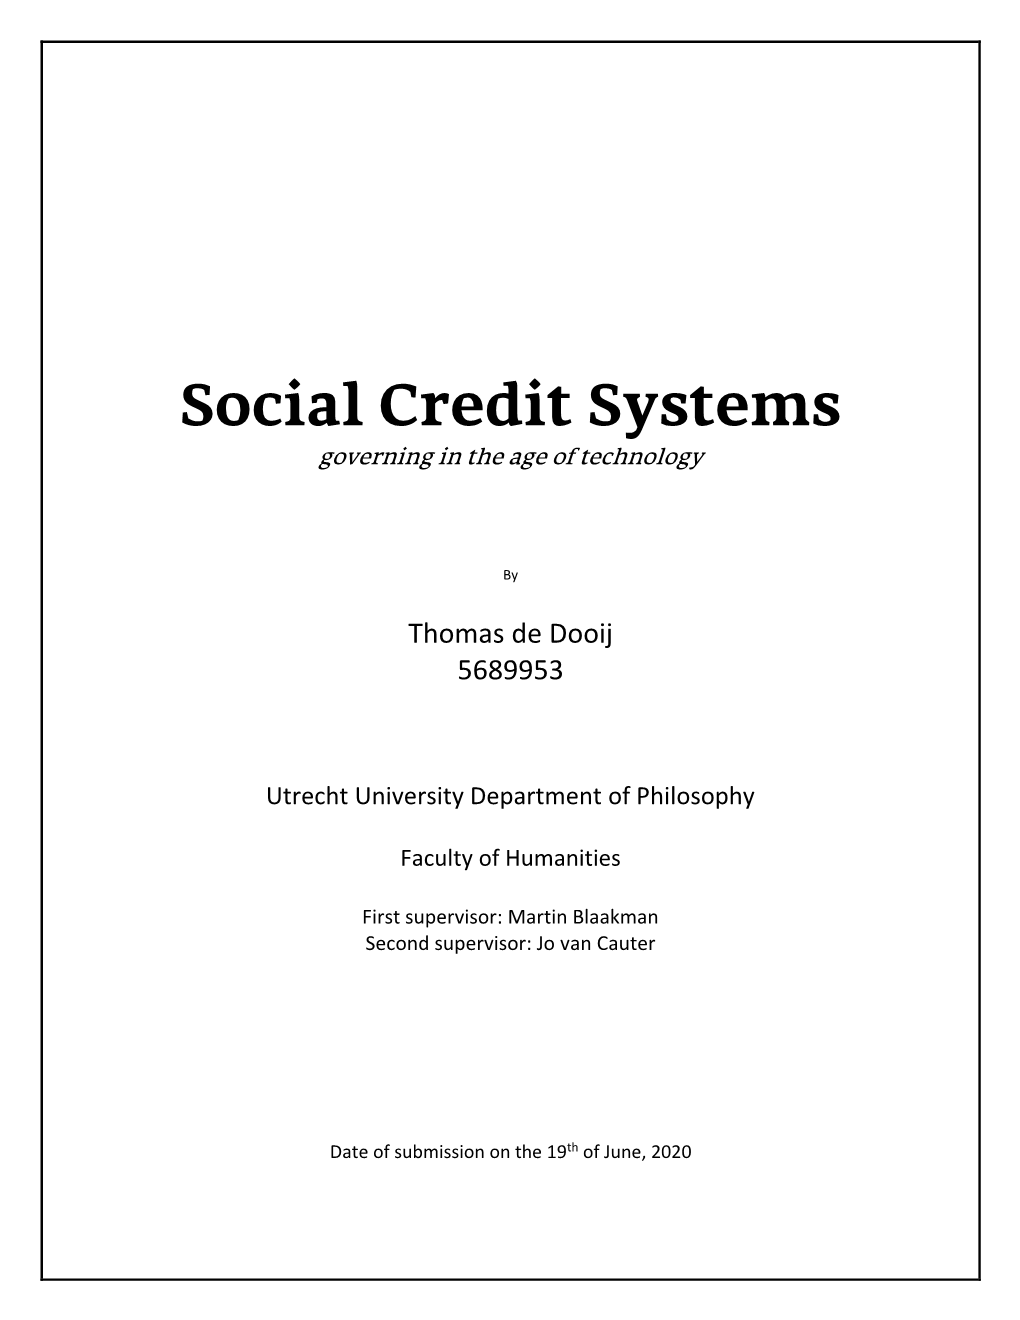 Social Credit Systems Governing in the Age of Technology